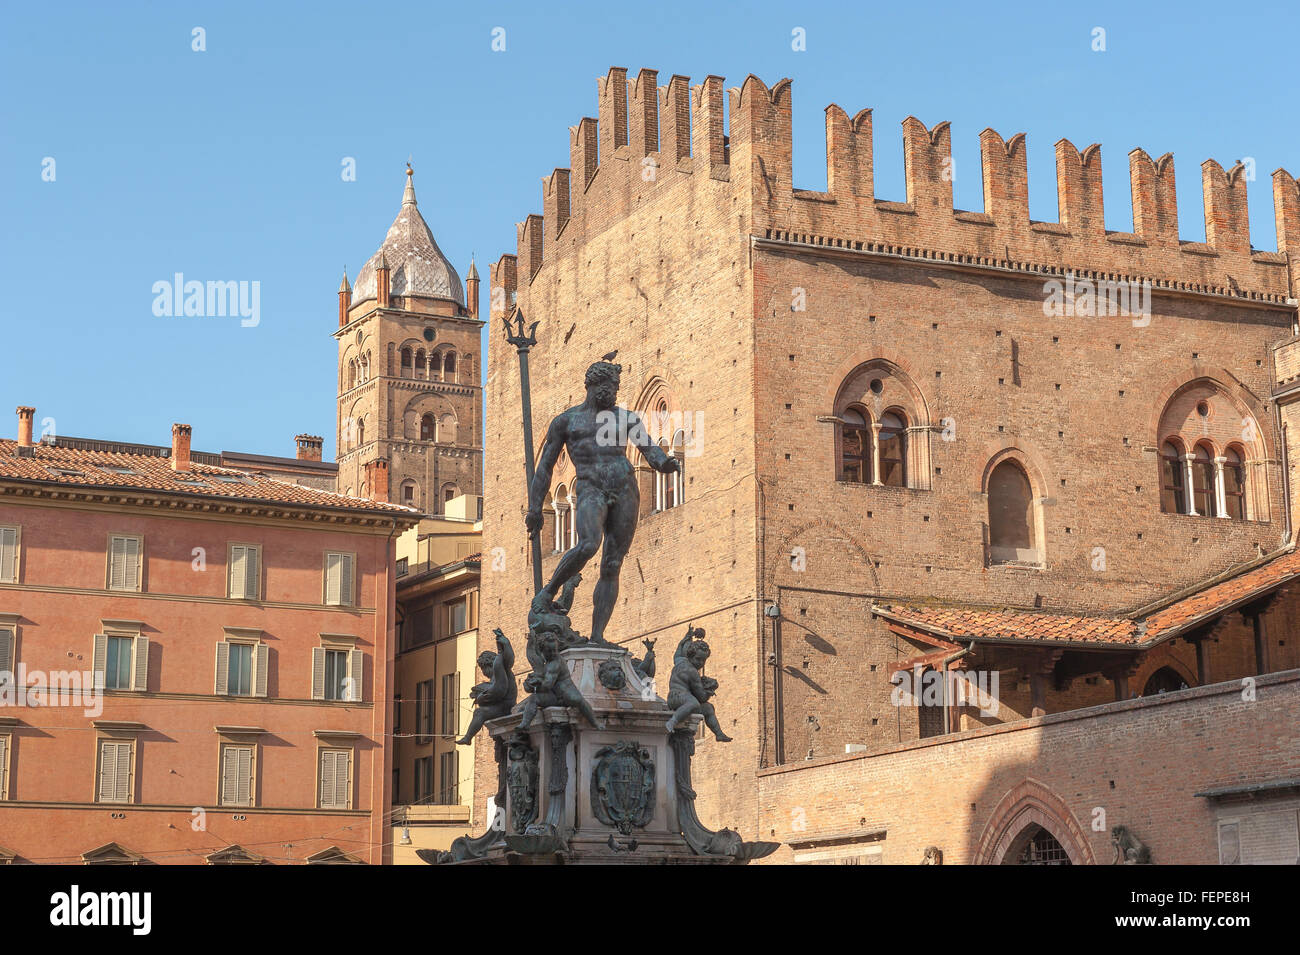 Bologna fountain, view of the statue of Neptune and Palazzo Re Enzo sited in the Piazza del Nettuno in the centre of the old town area of Bologna. Stock Photo